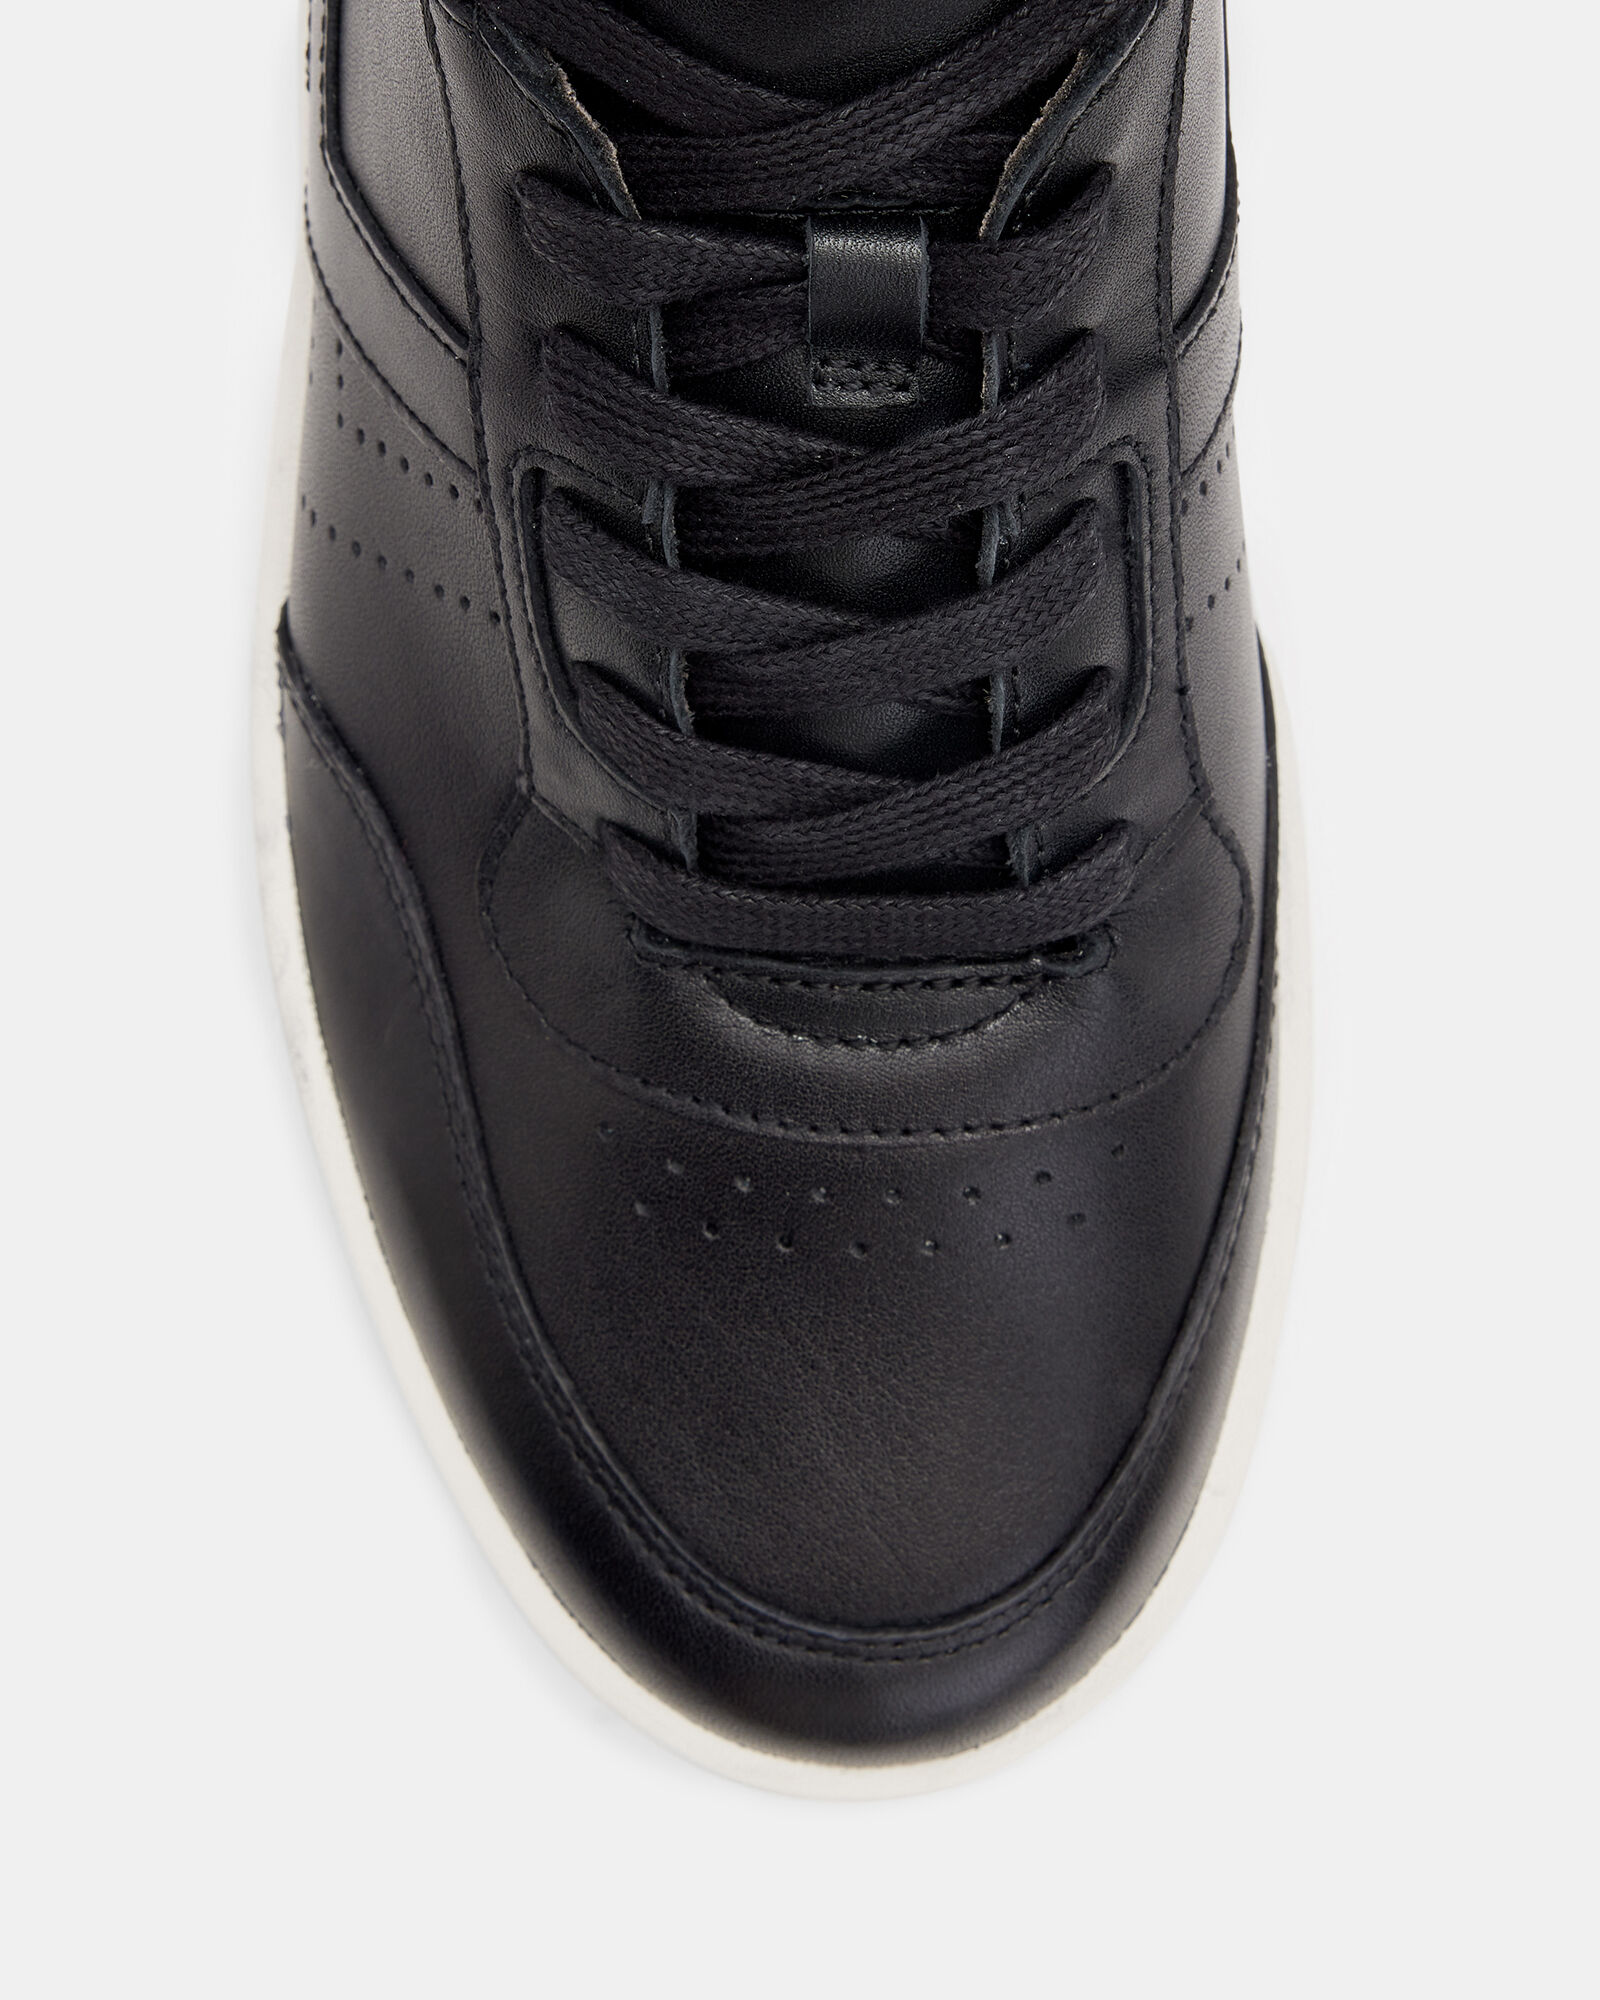 Pro Leather High Top Sneakers